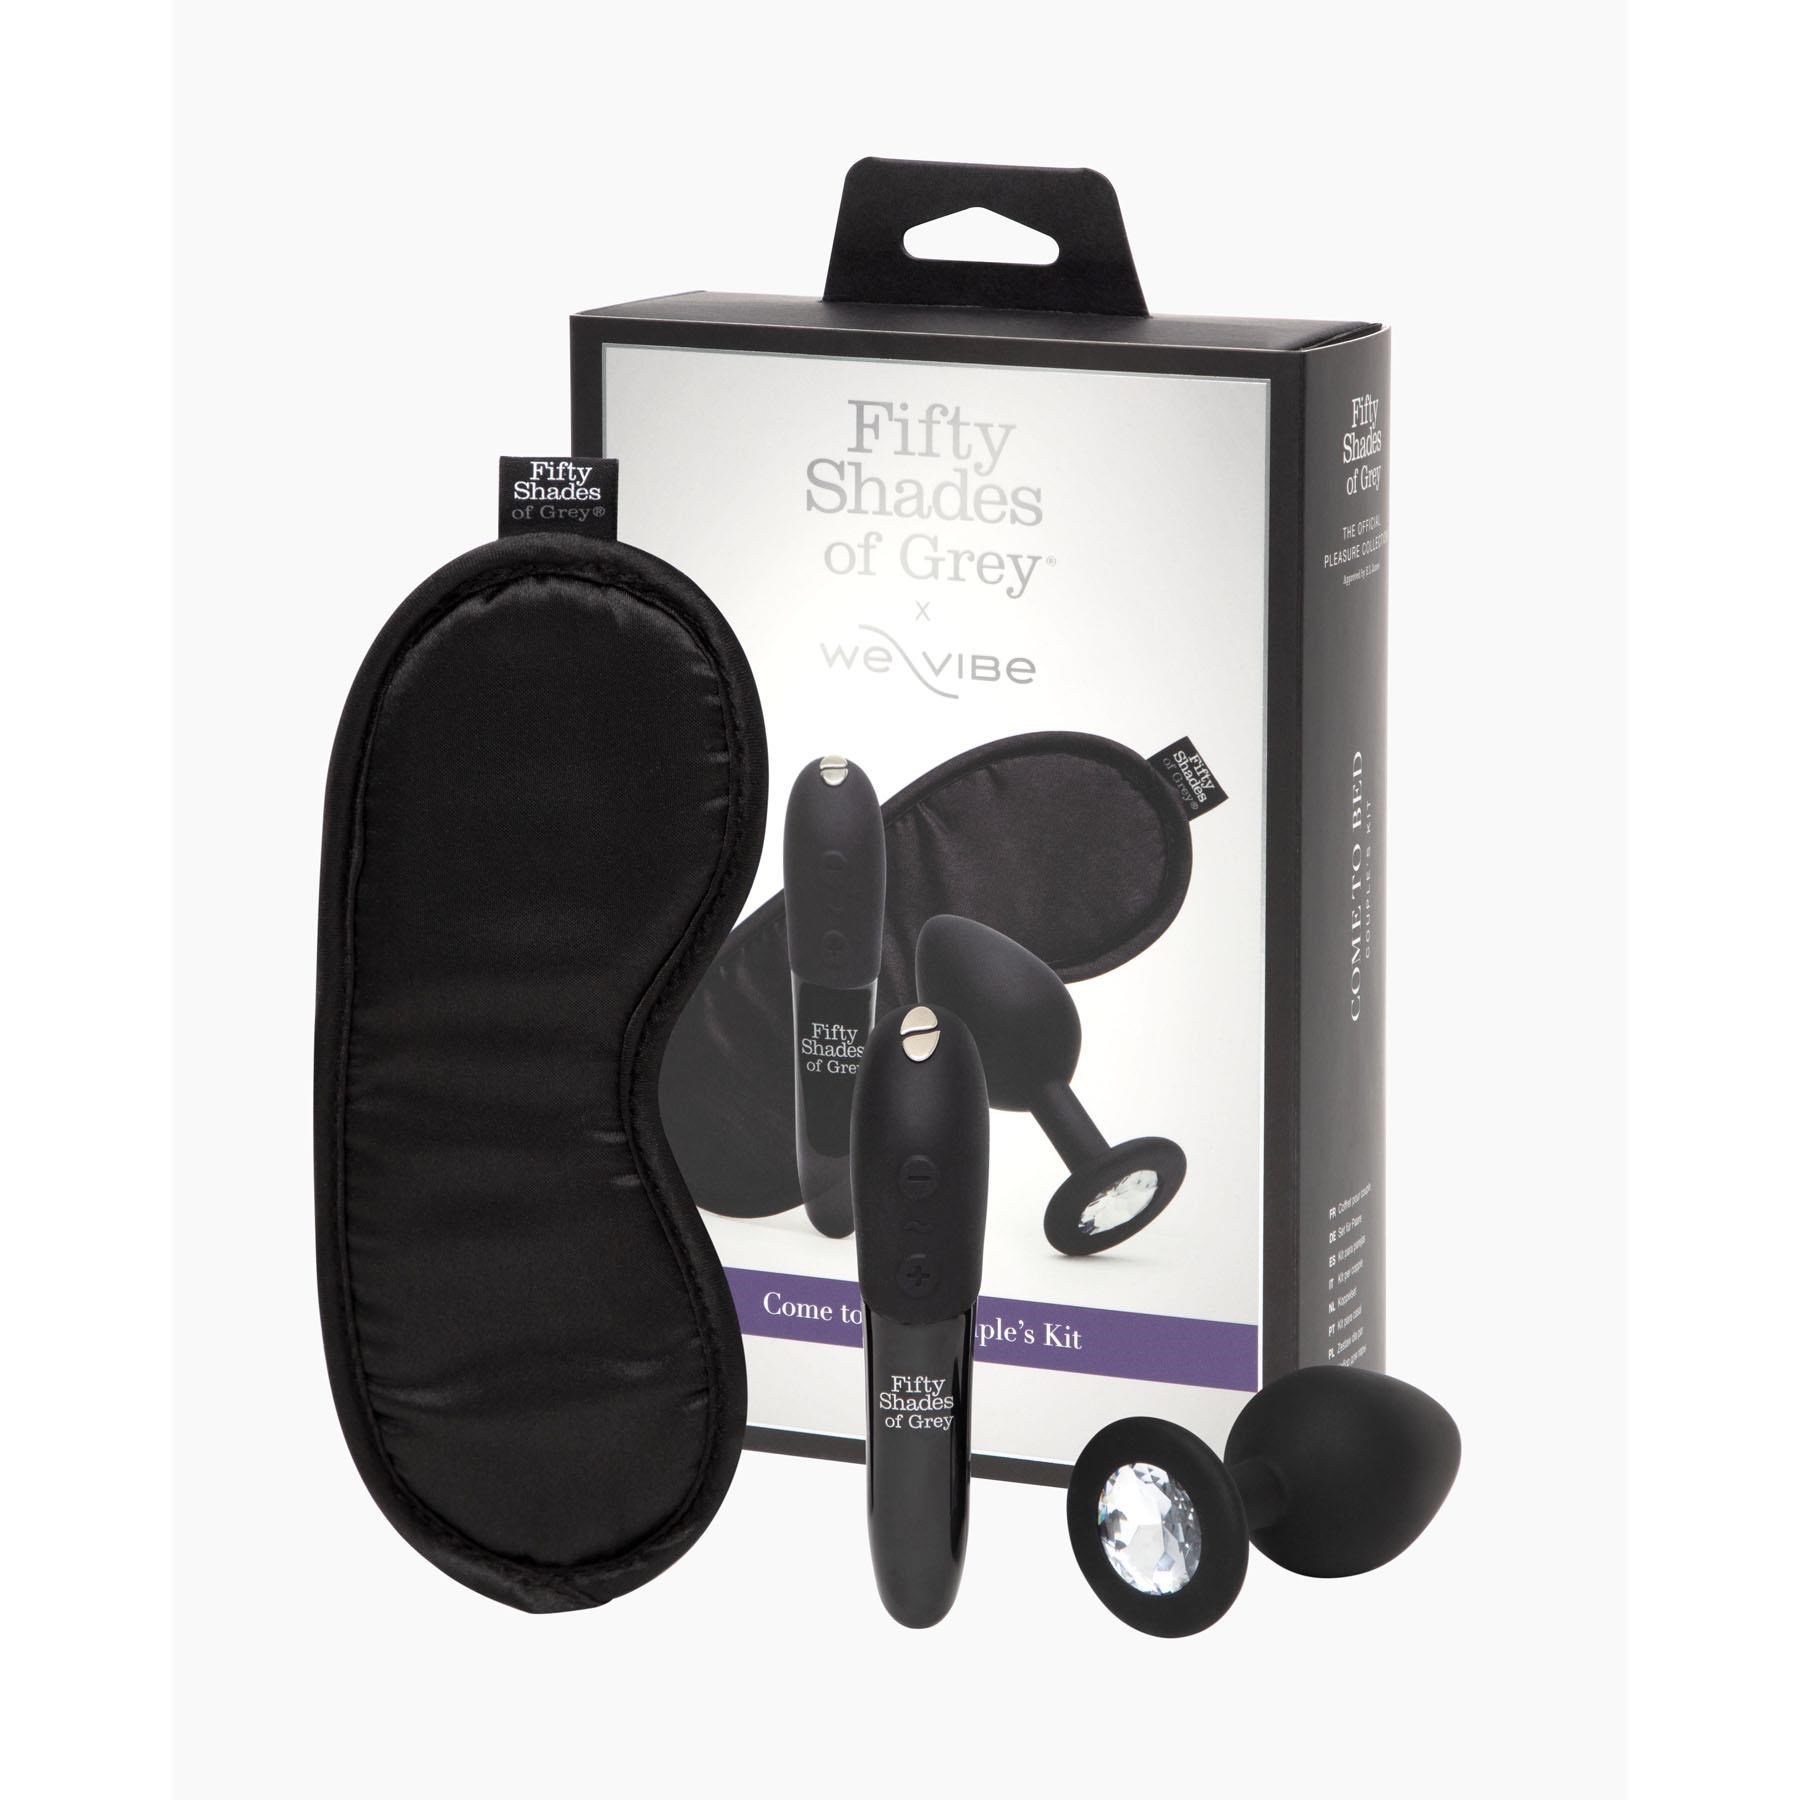 Fifty Shades of Grey & We-Vibe Come To Bed Couples Kit - All Components and Packaging